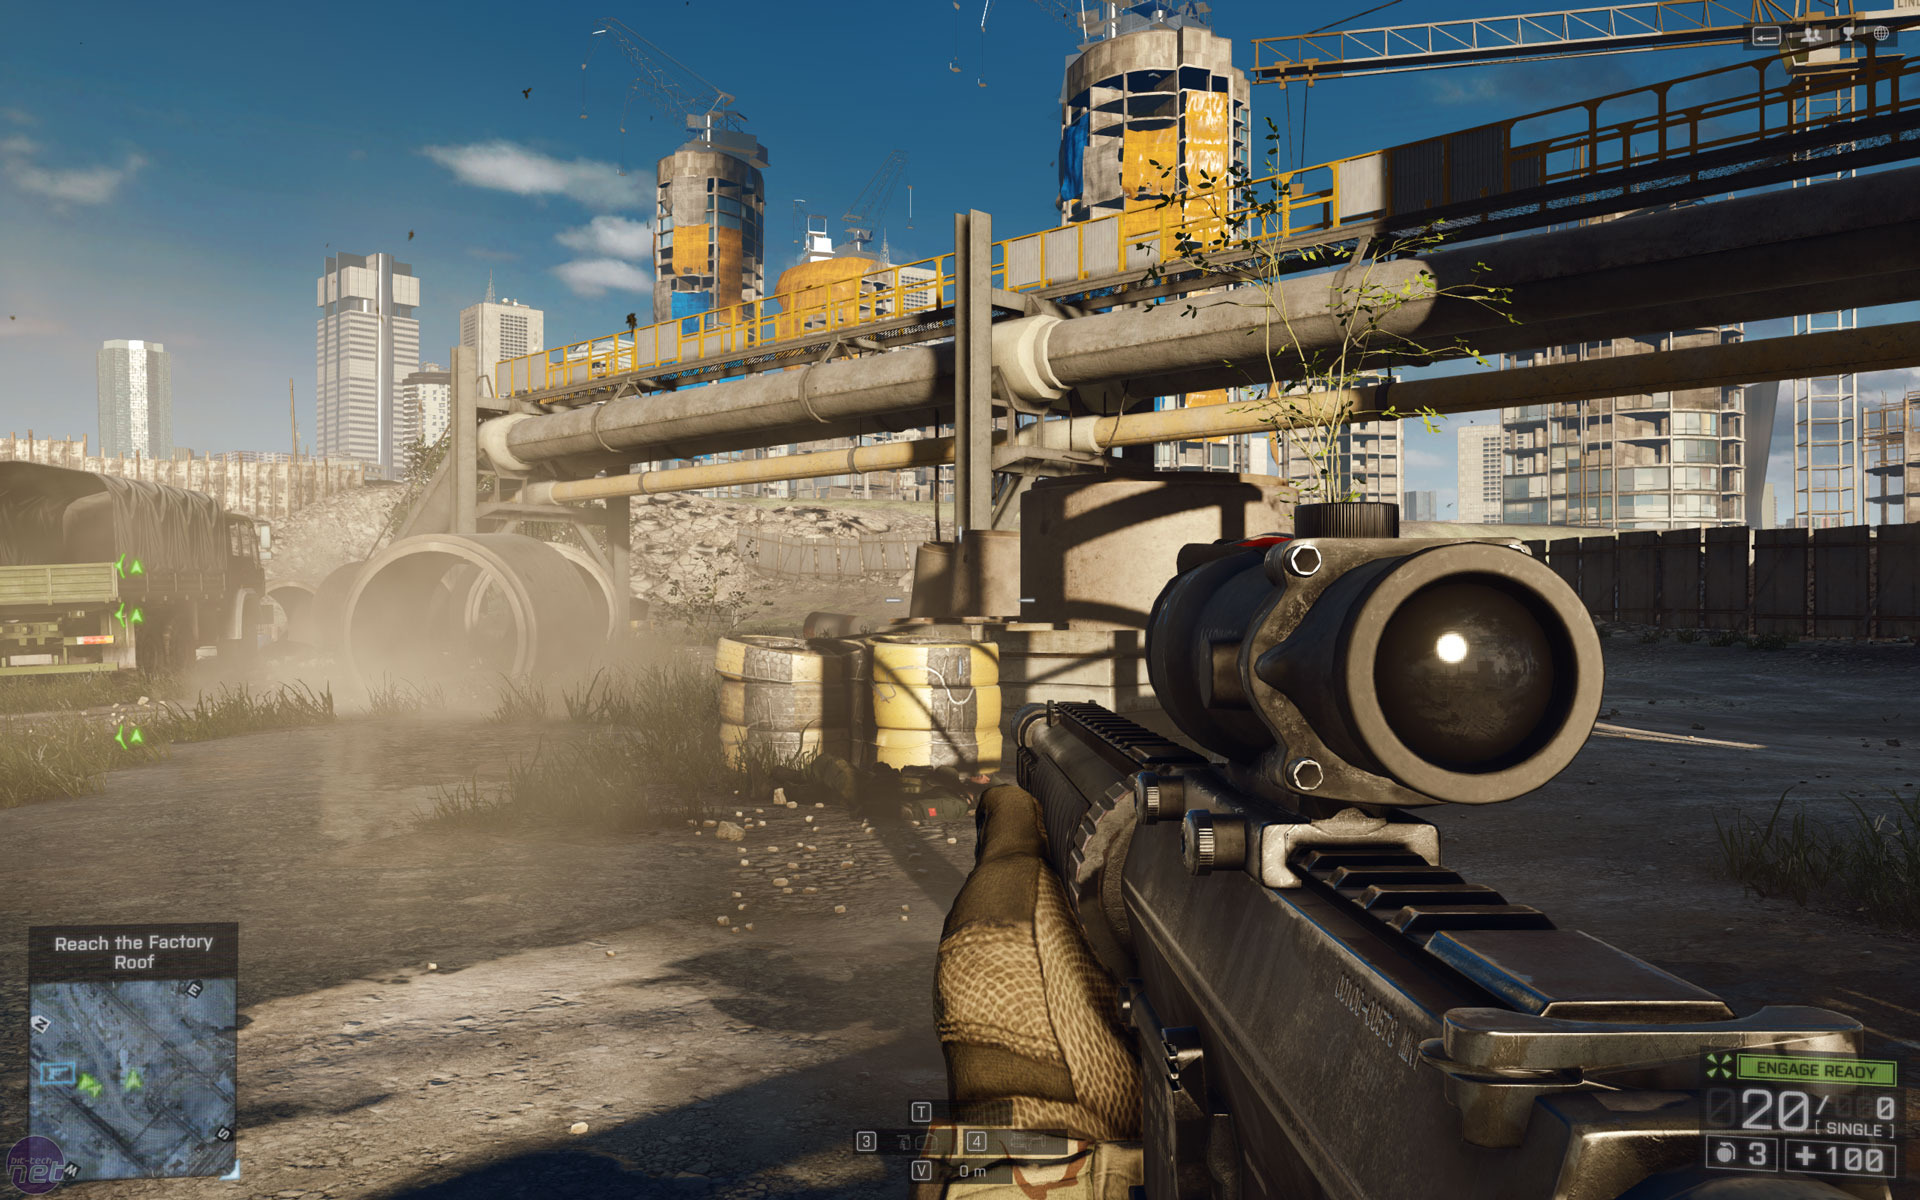 Battlefield 4 Benchmarked -  Reviews